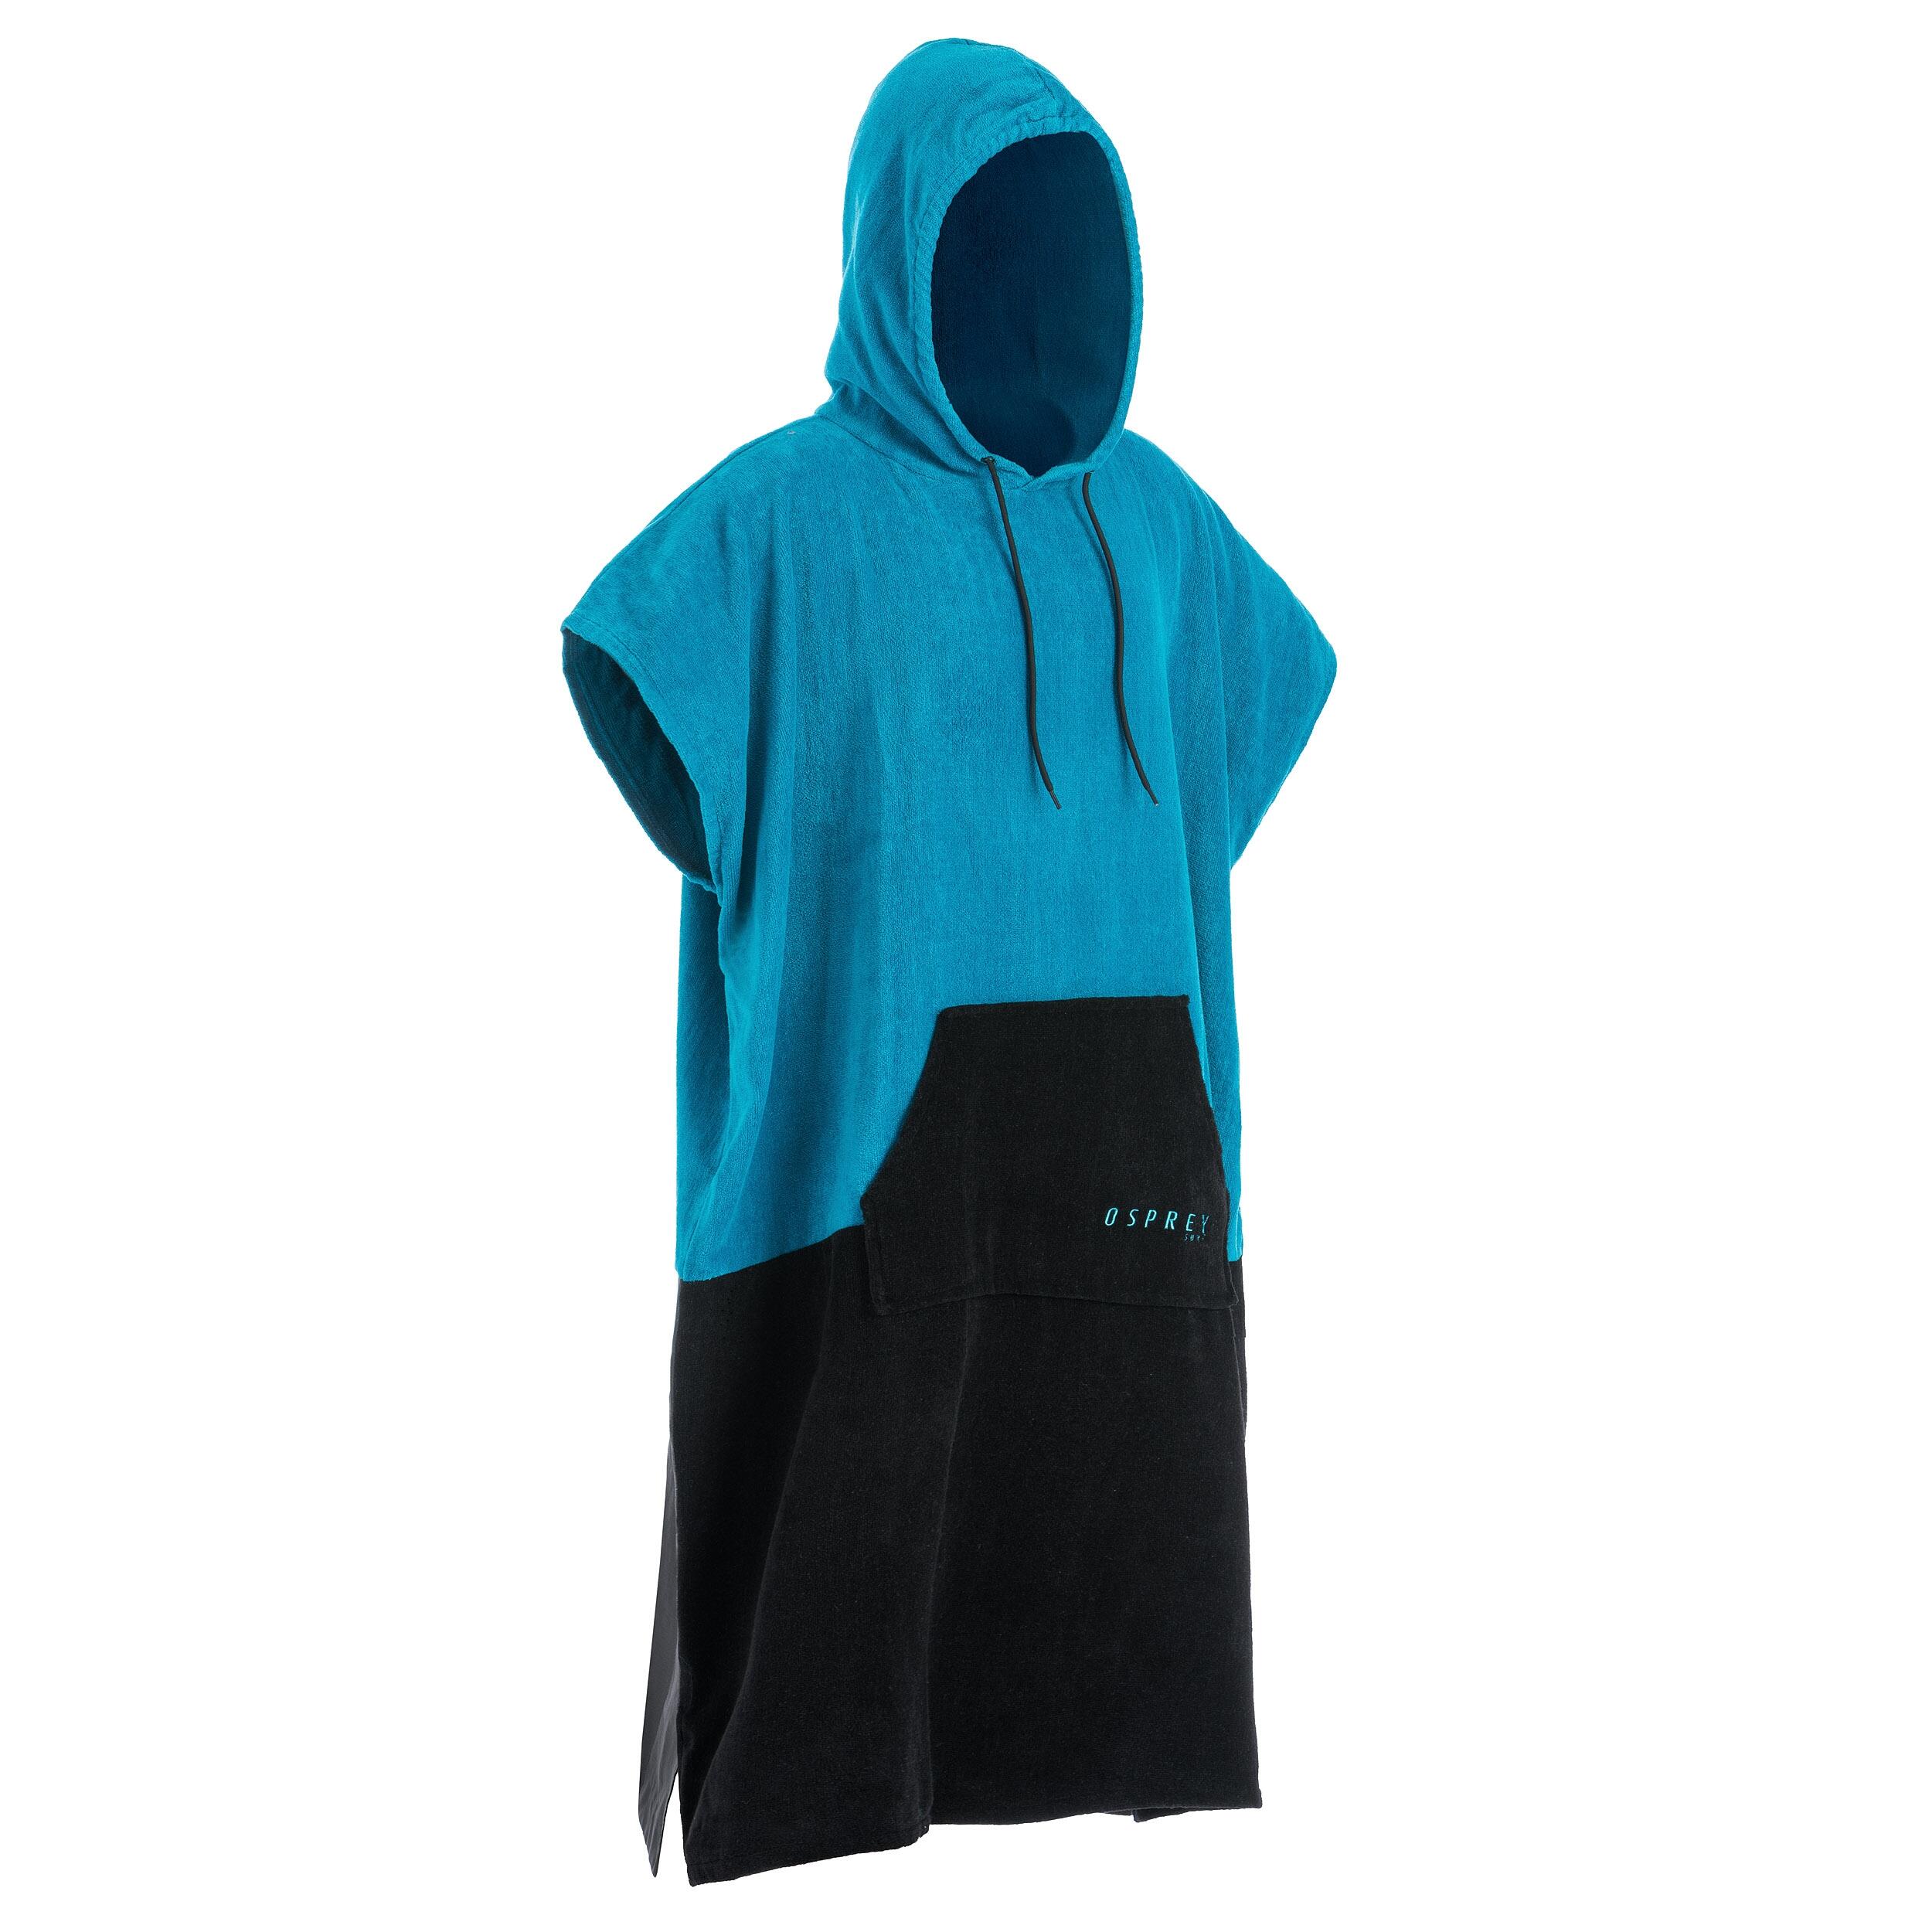 Osprey Adult Surf Poncho Hooded Towel Beach Changing Robe, Blue 1/4